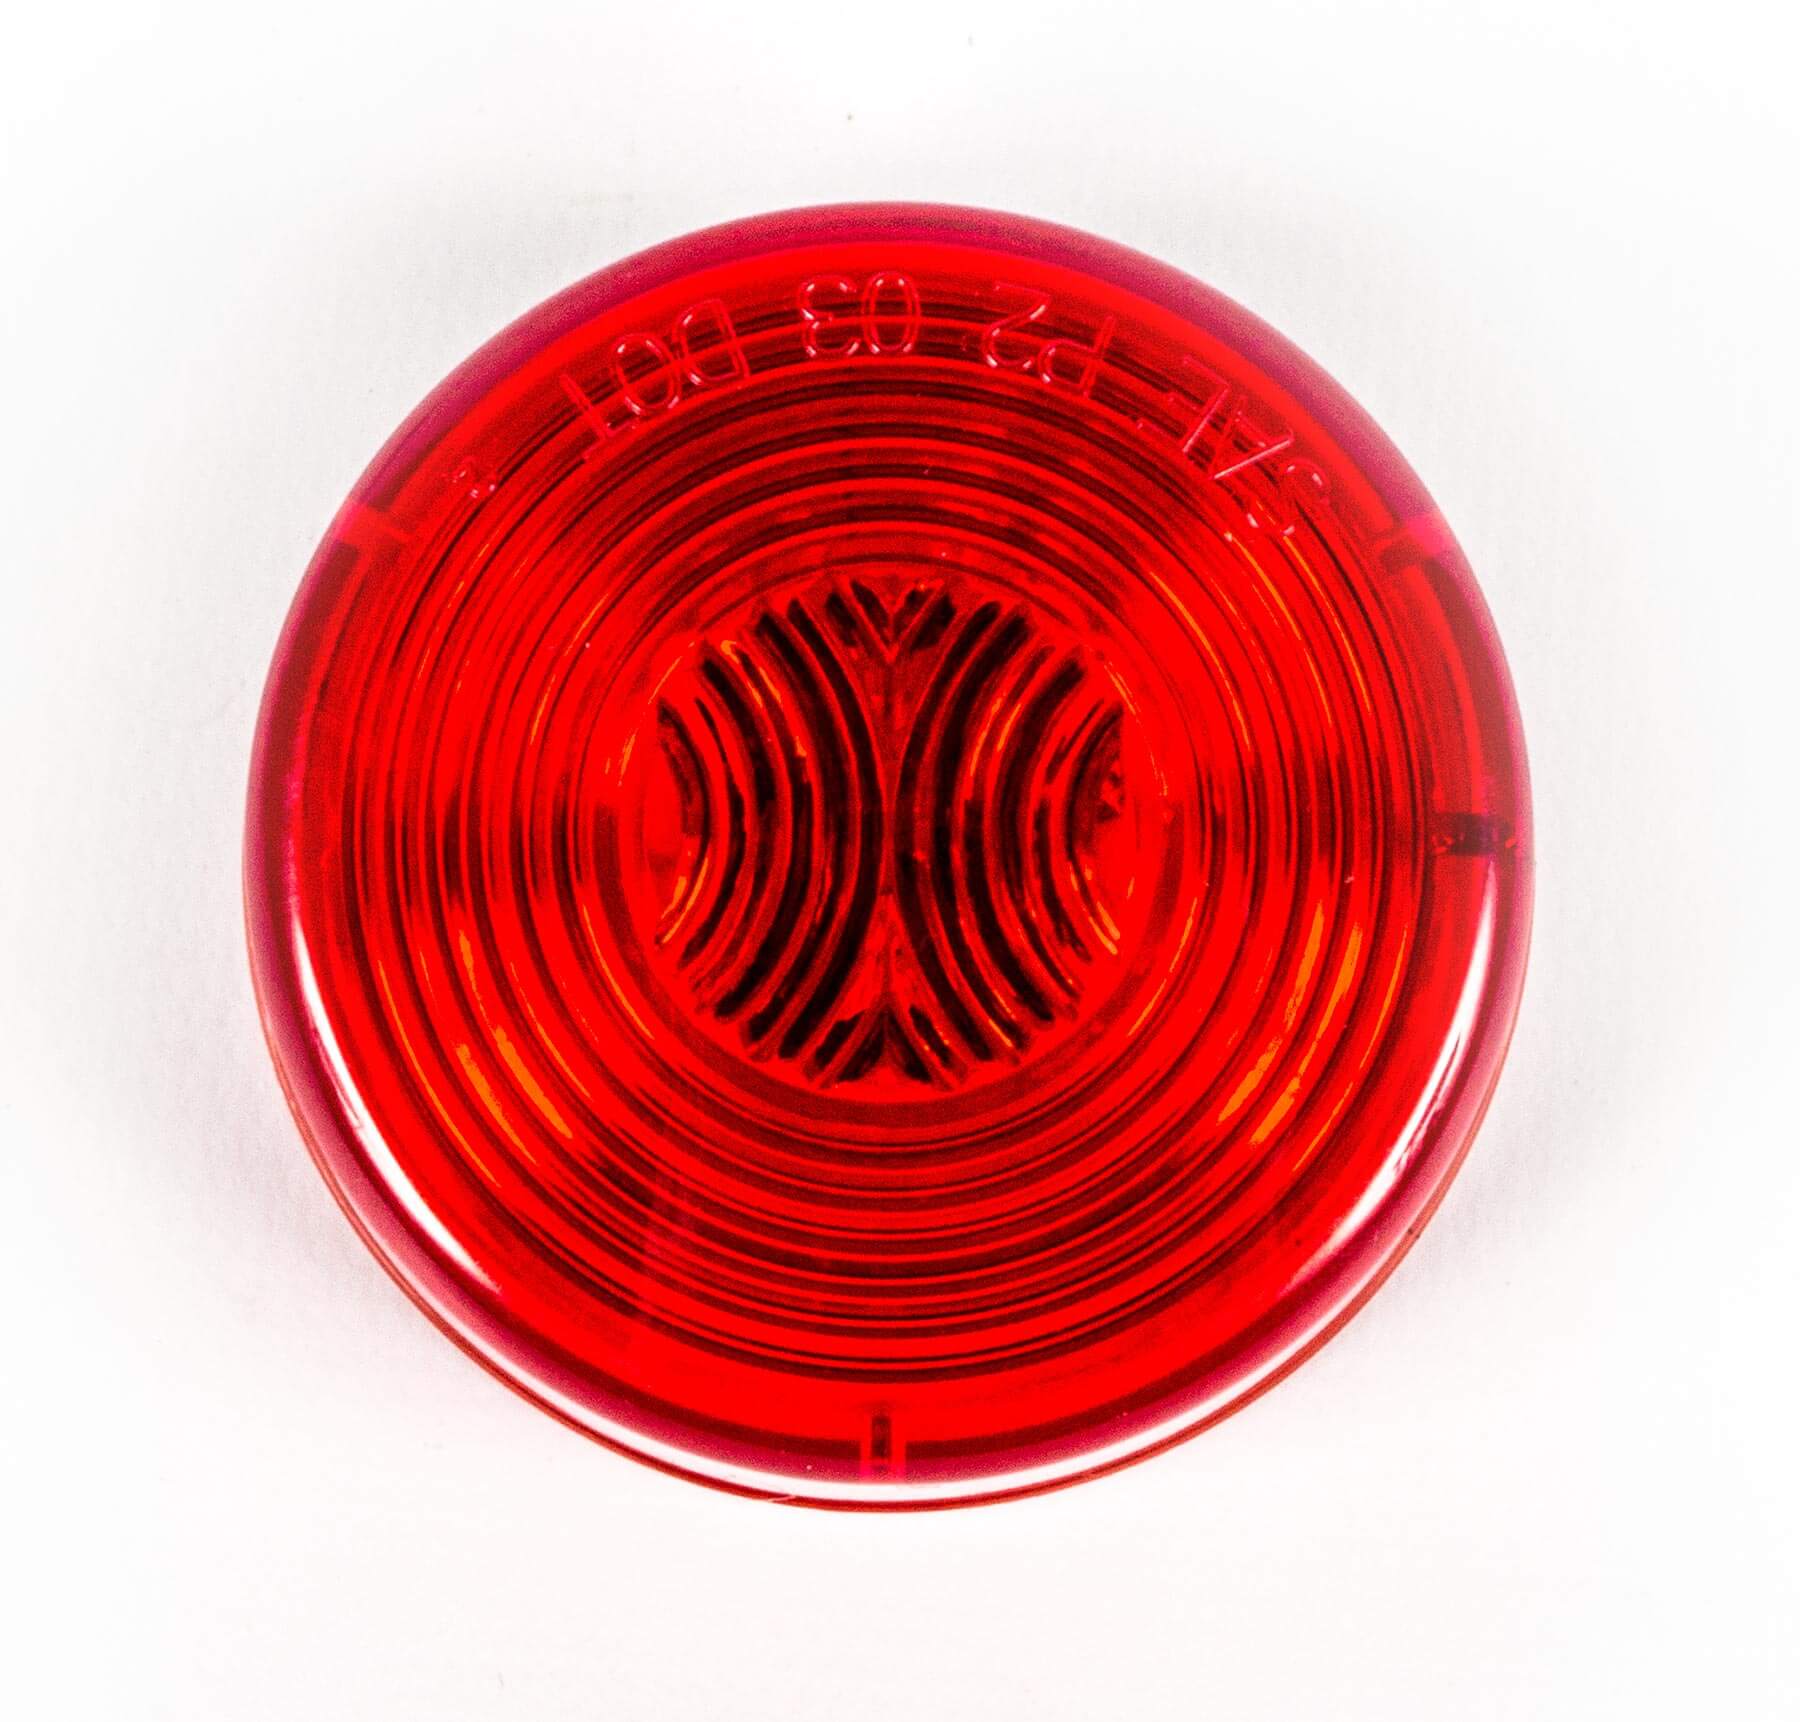 INCANDESCENT ROUND SEALED LAMP 2" RED